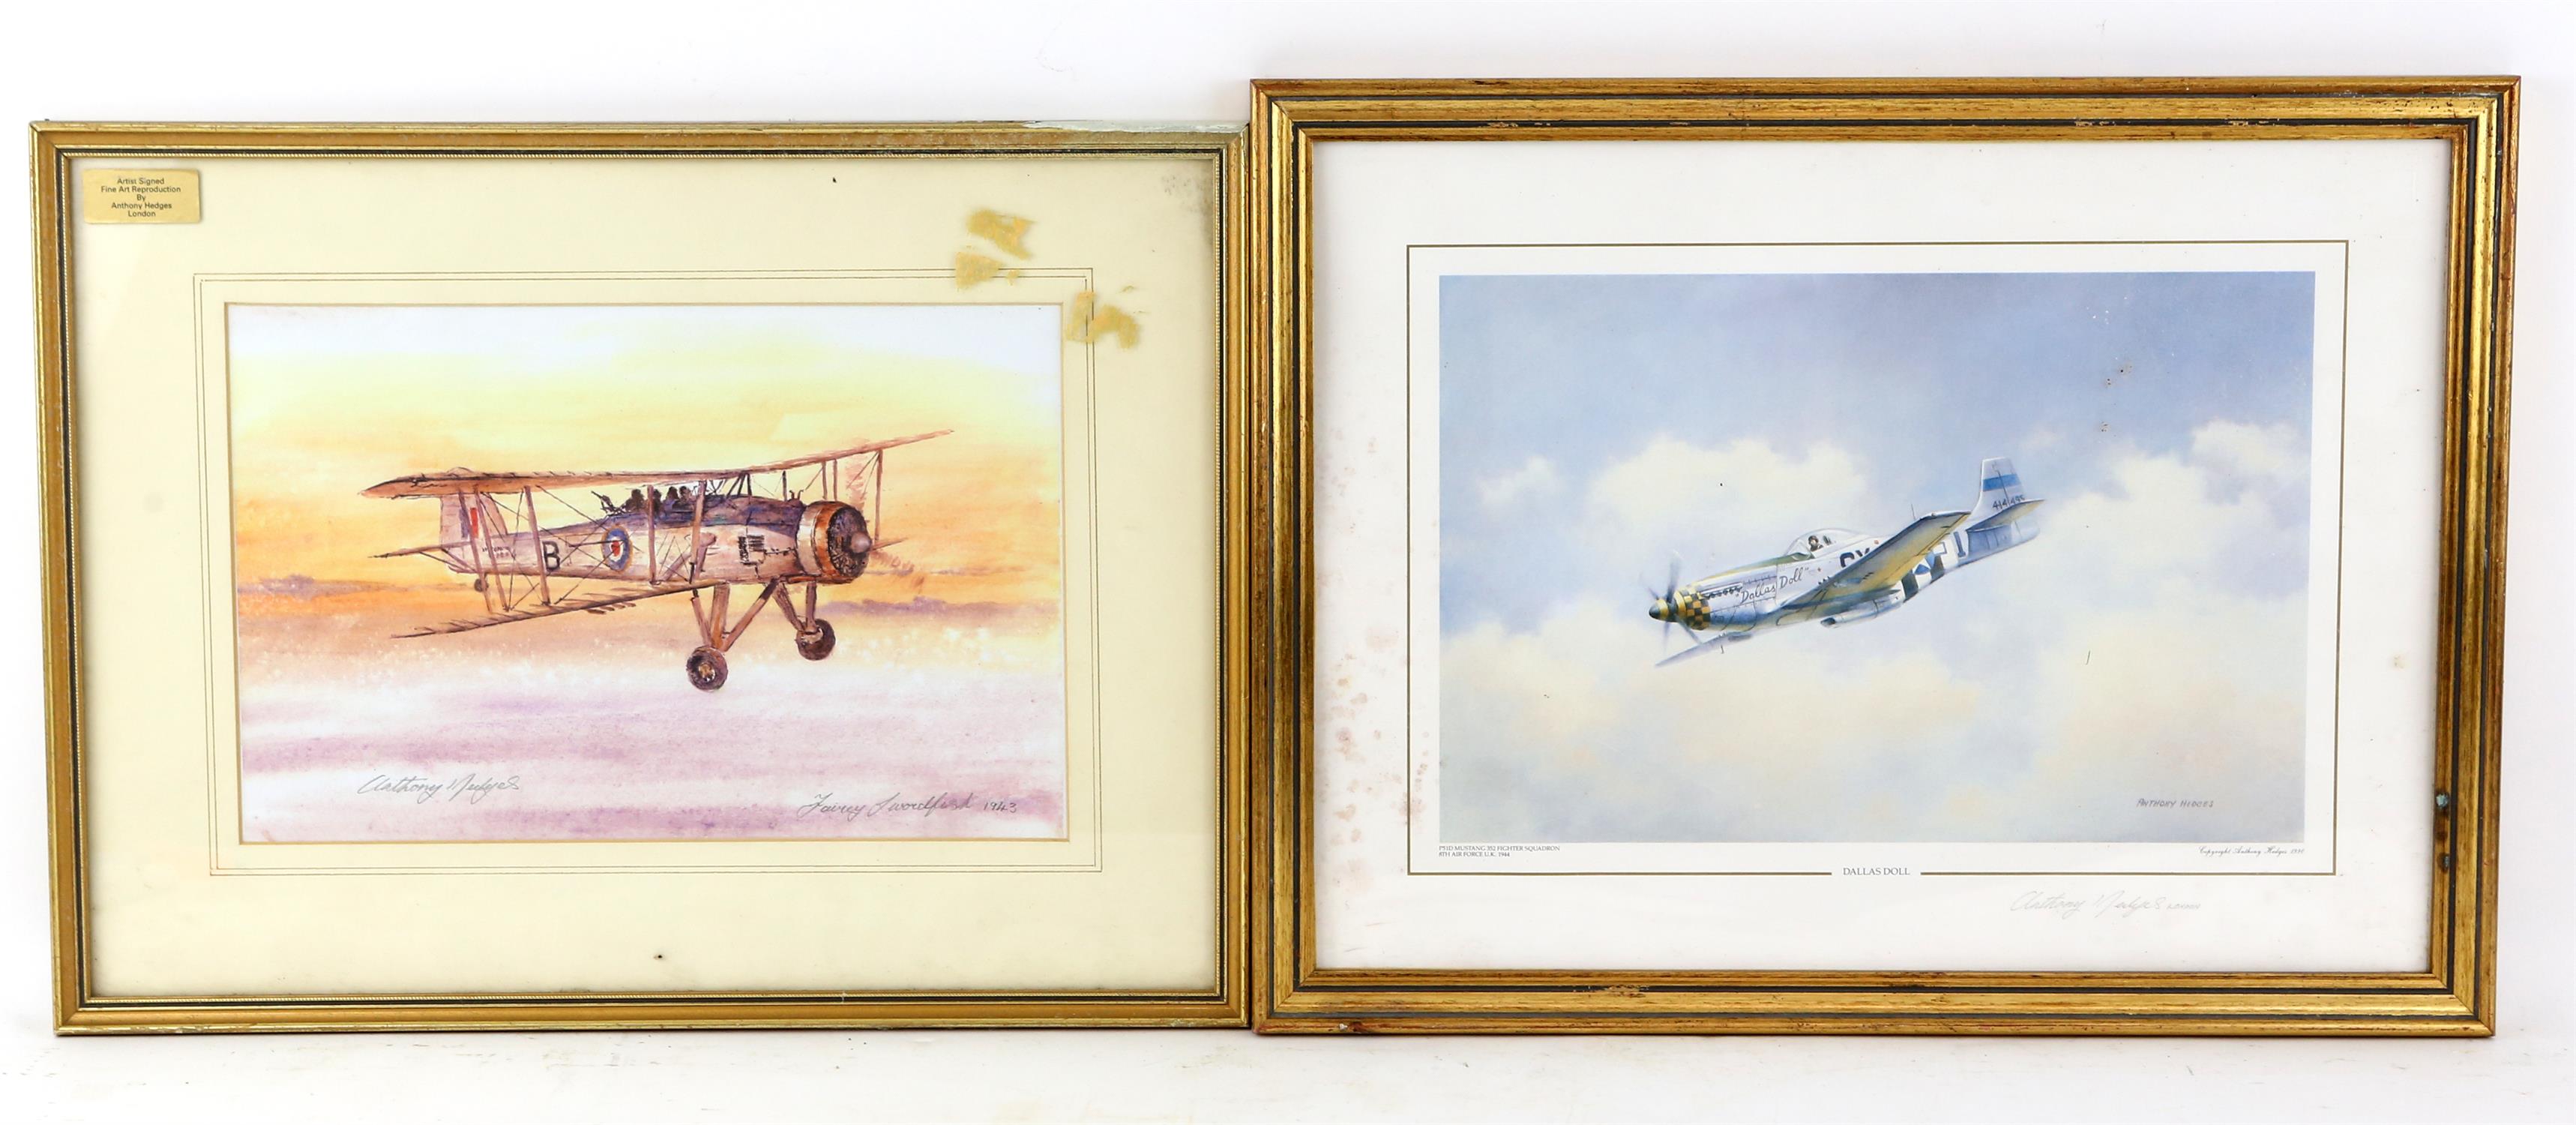 Anthony Hedges (twentieth century), 'Fairey Swordfish 1943'. Print. Signed and titled in pencil.